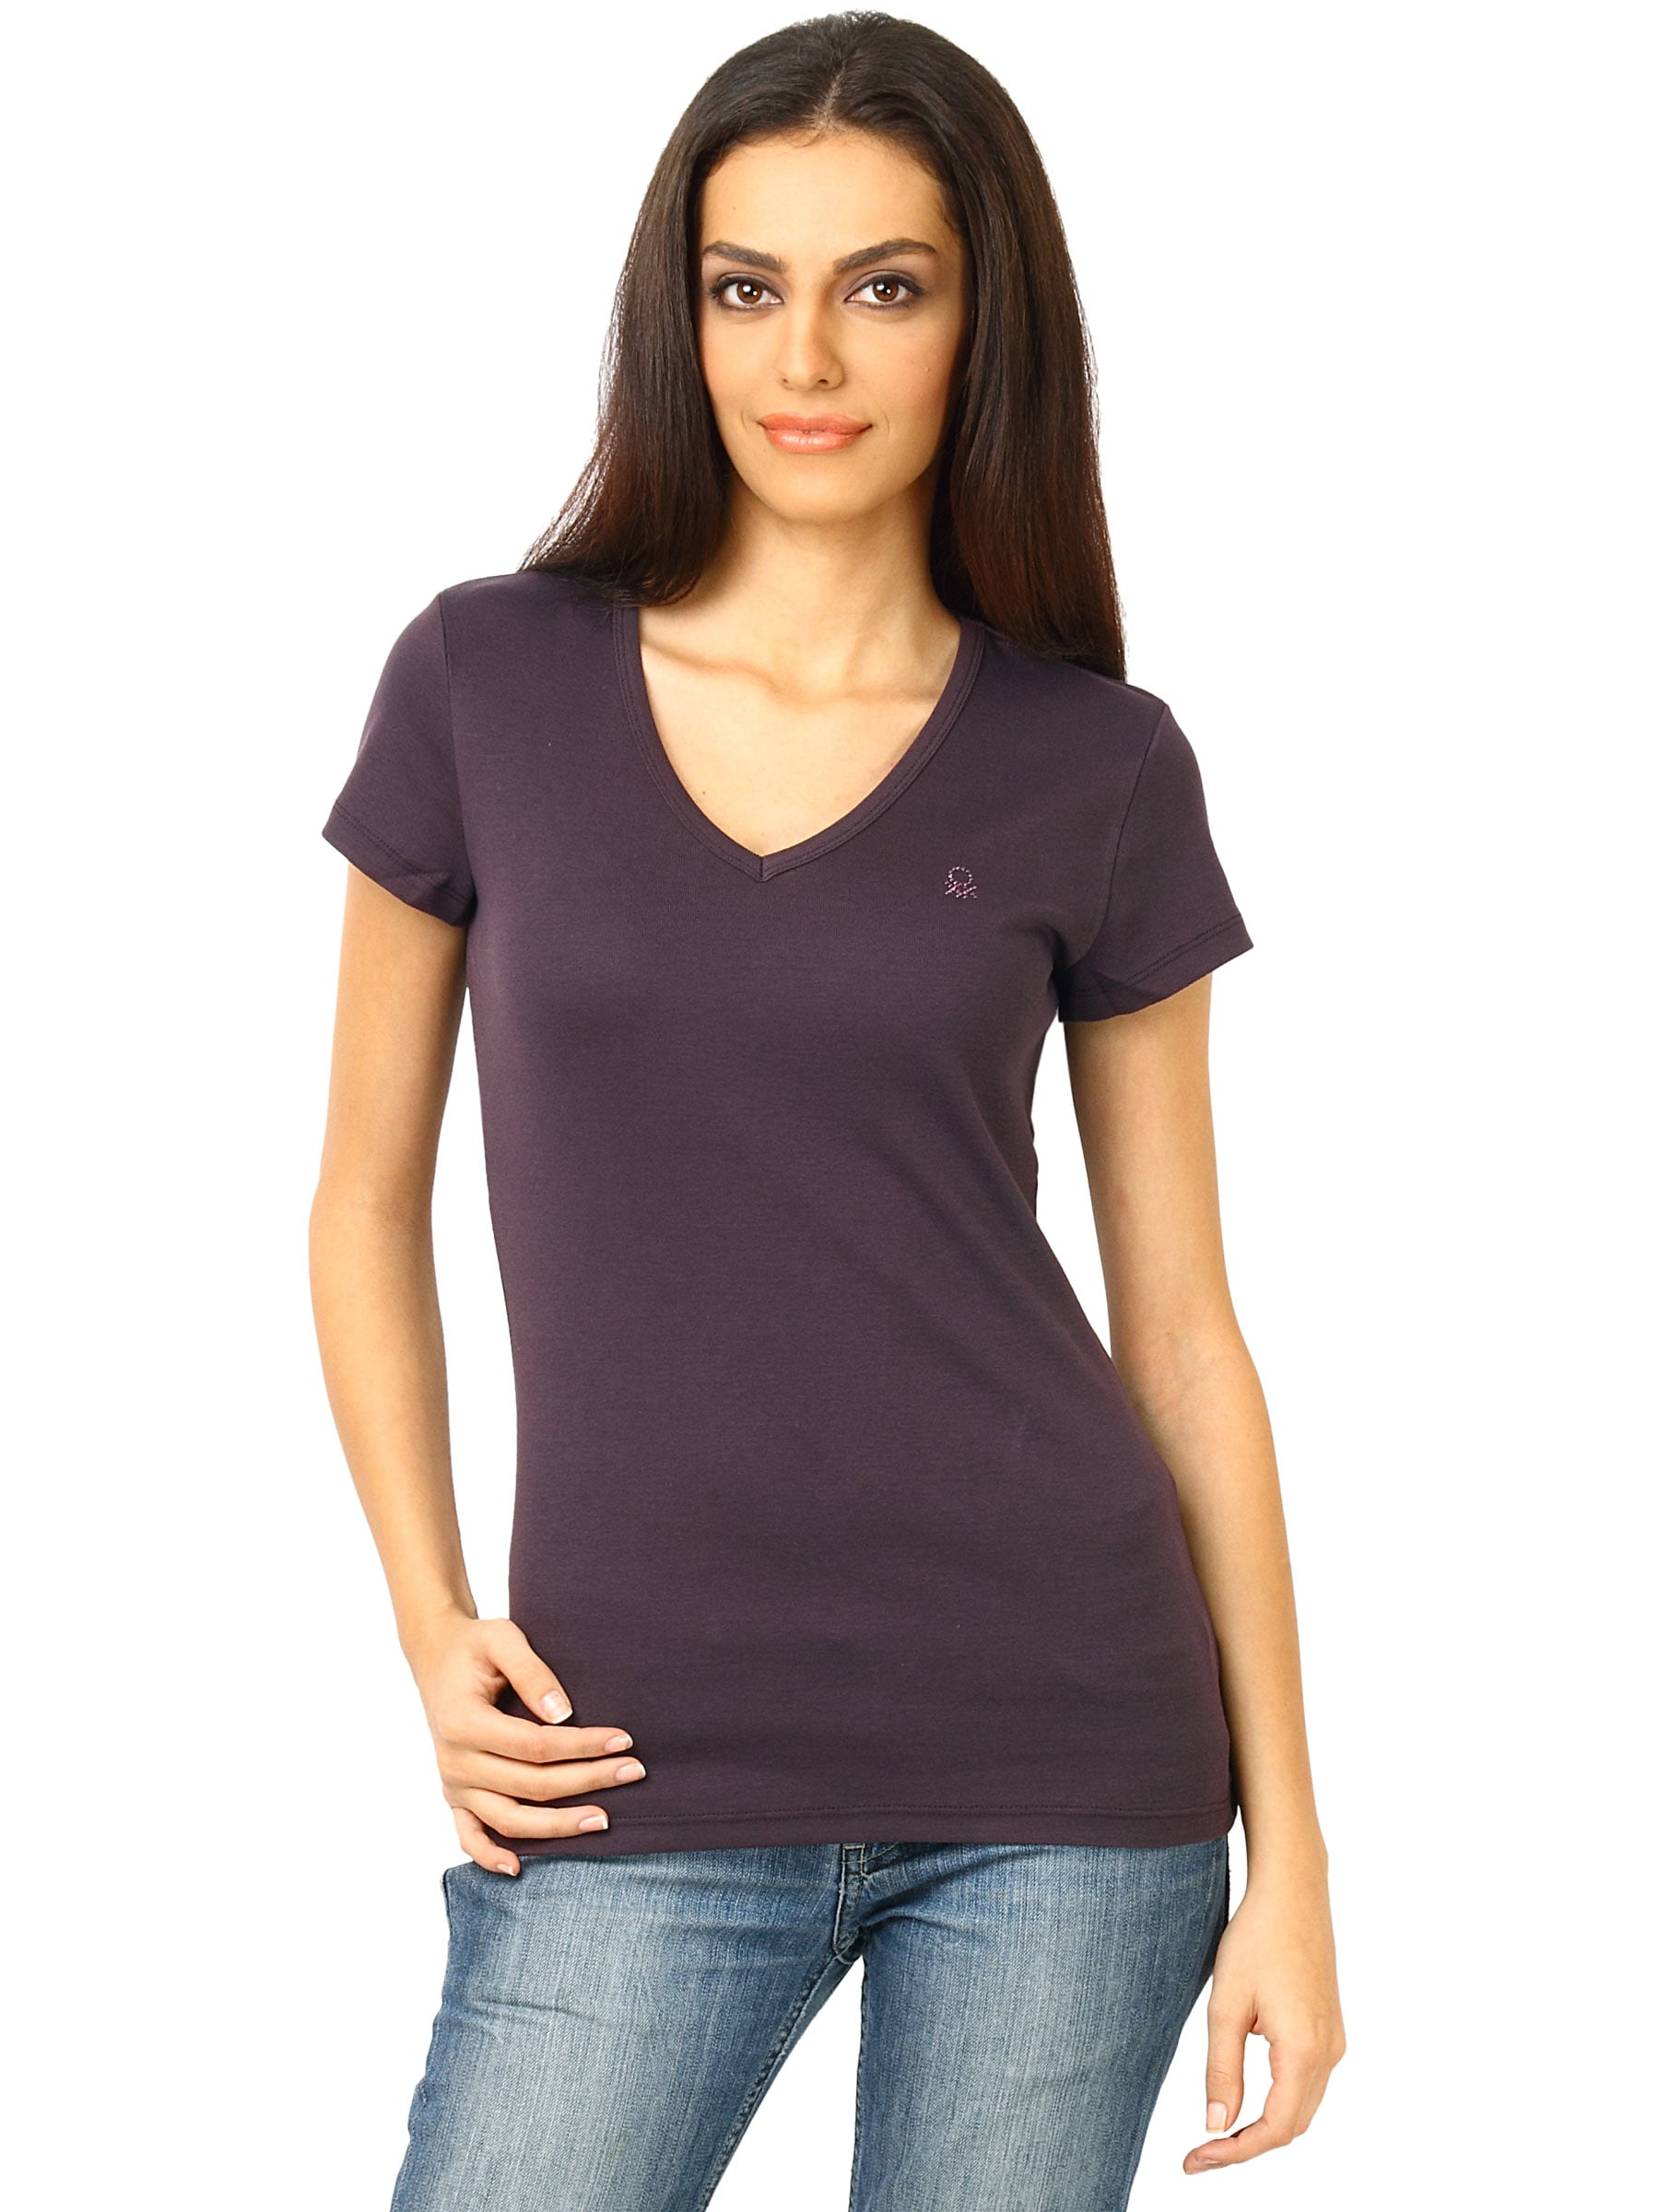 United Colors of Benetton Women Solid Purple T-shirt